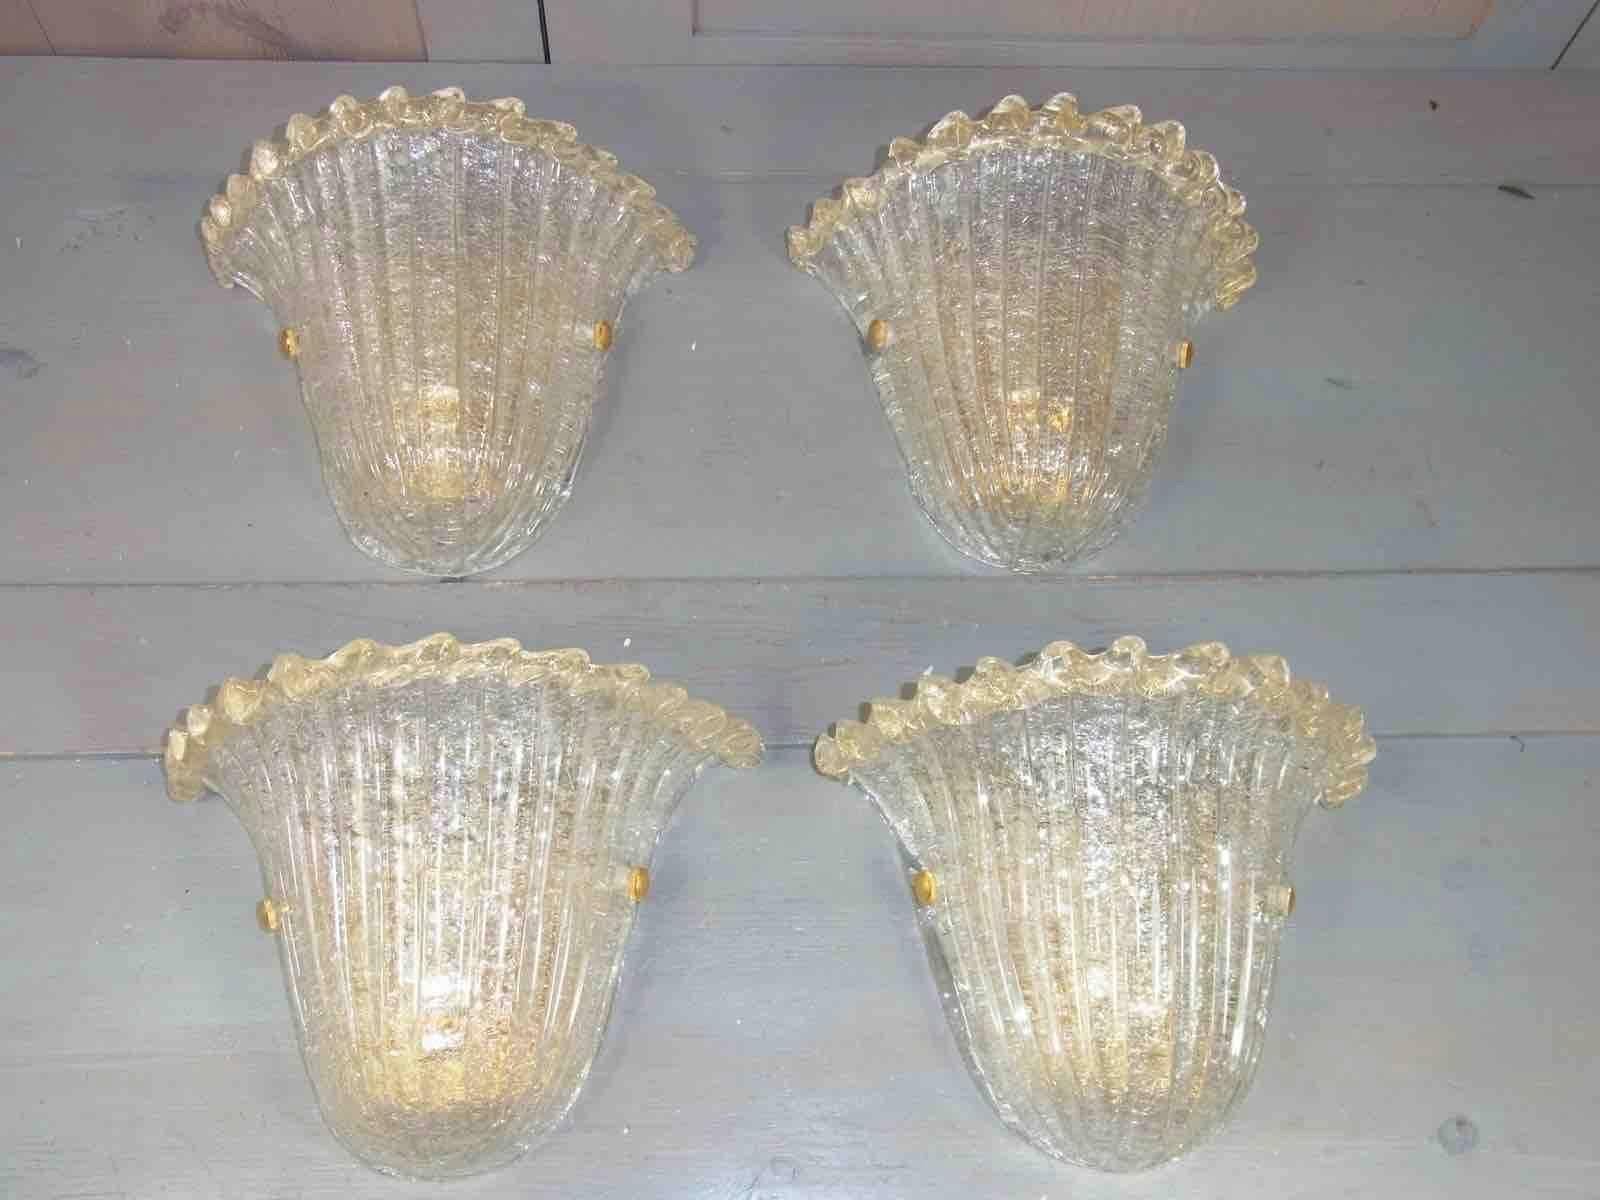 Two pair of beautiful Murano glass shell sconces. Made of heavy Murano glass and gold-plated metal. Each fixture requires one European E27 Edison bulb, each bulb up to 60 watts.